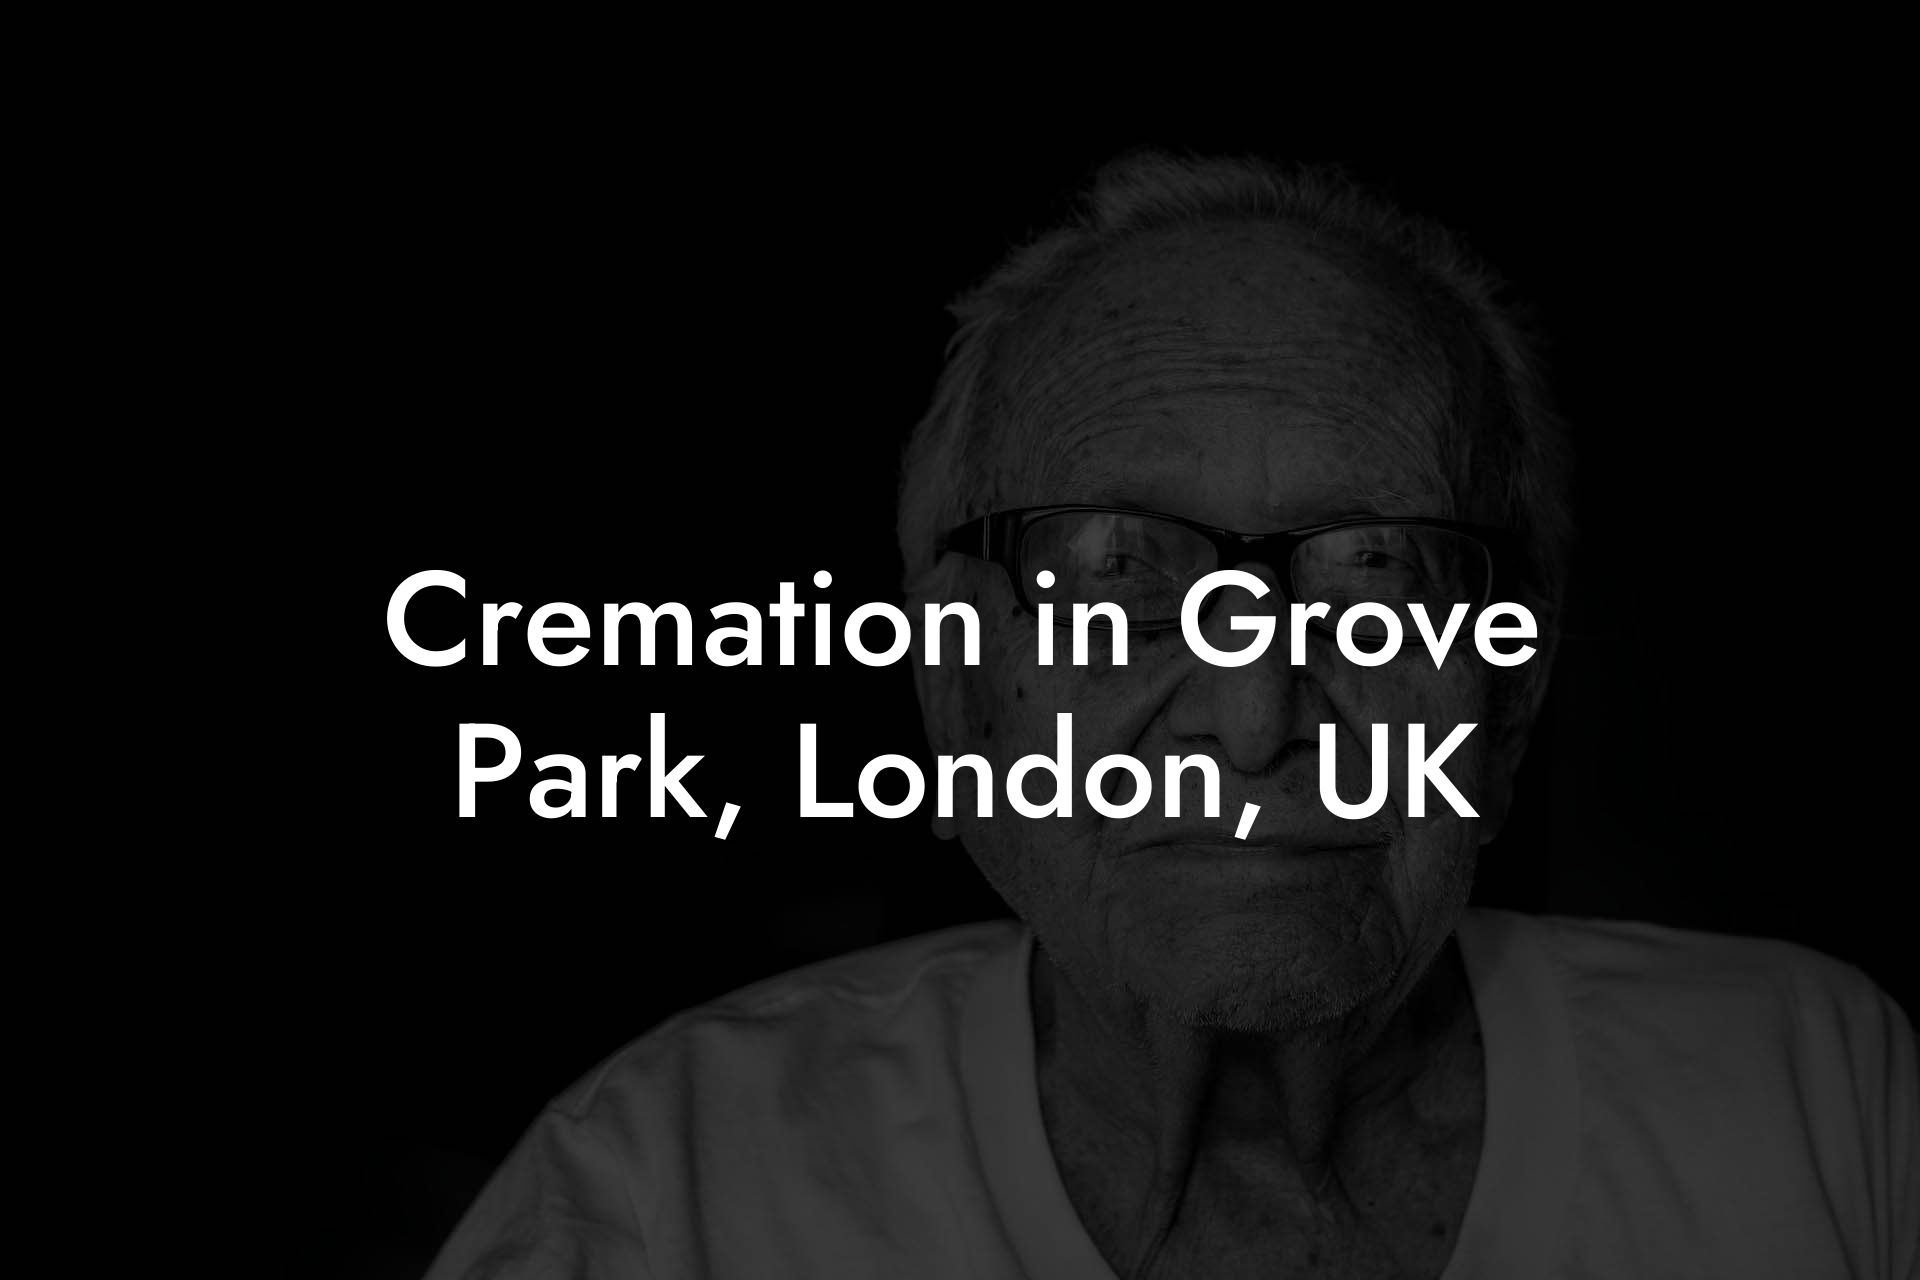 Cremation in Grove Park, London, UK